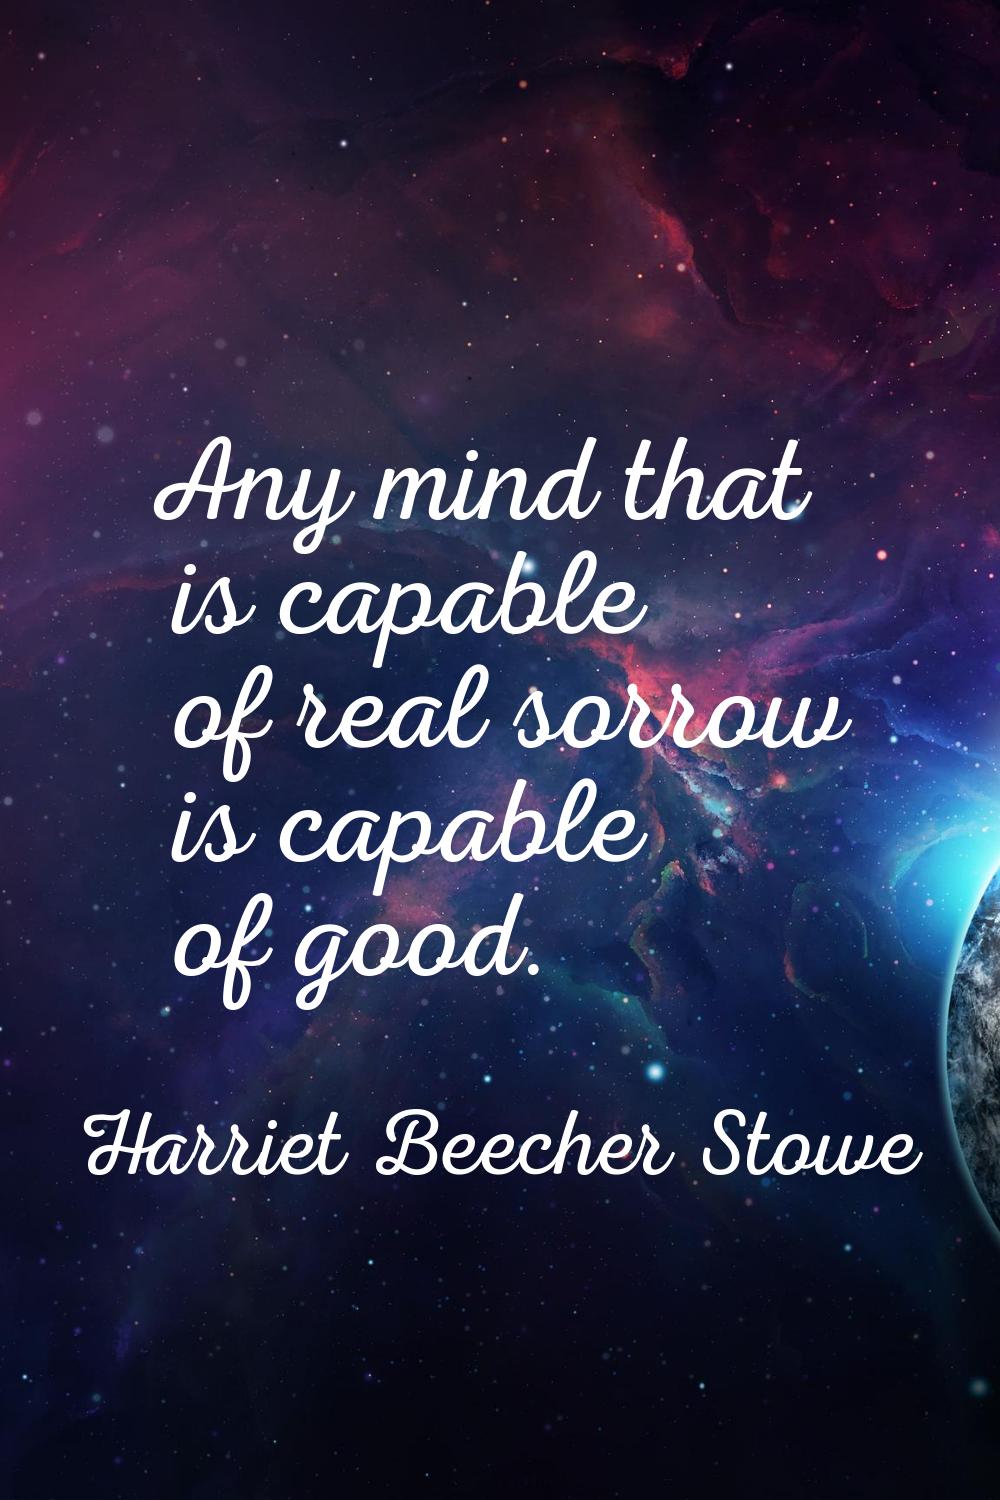 Any mind that is capable of real sorrow is capable of good.